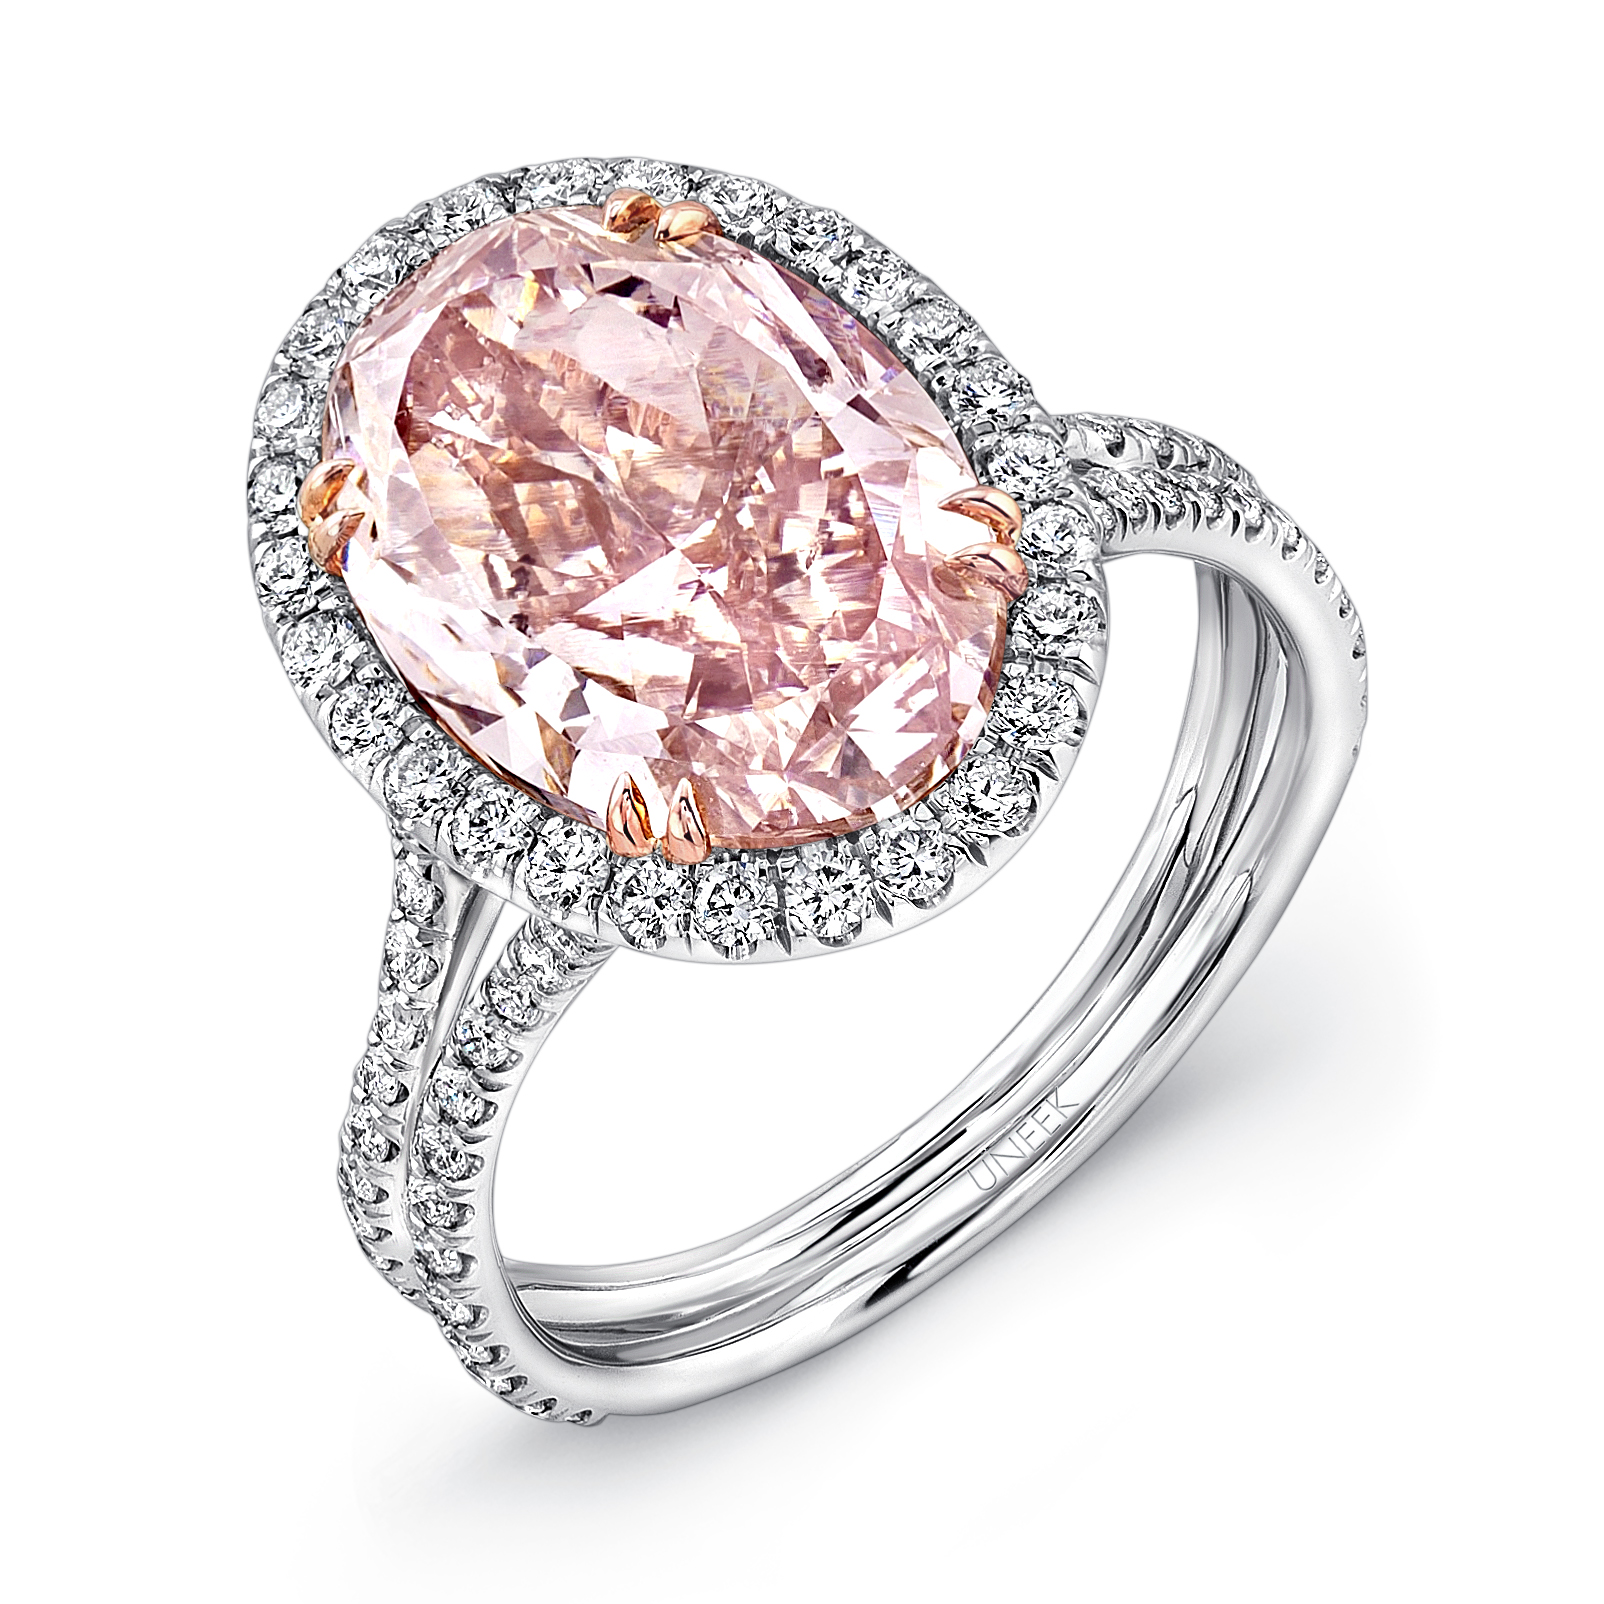 The 1.5 Million Dollar Pink Diamond Engagement Ring by Uneek Fine Jewelry